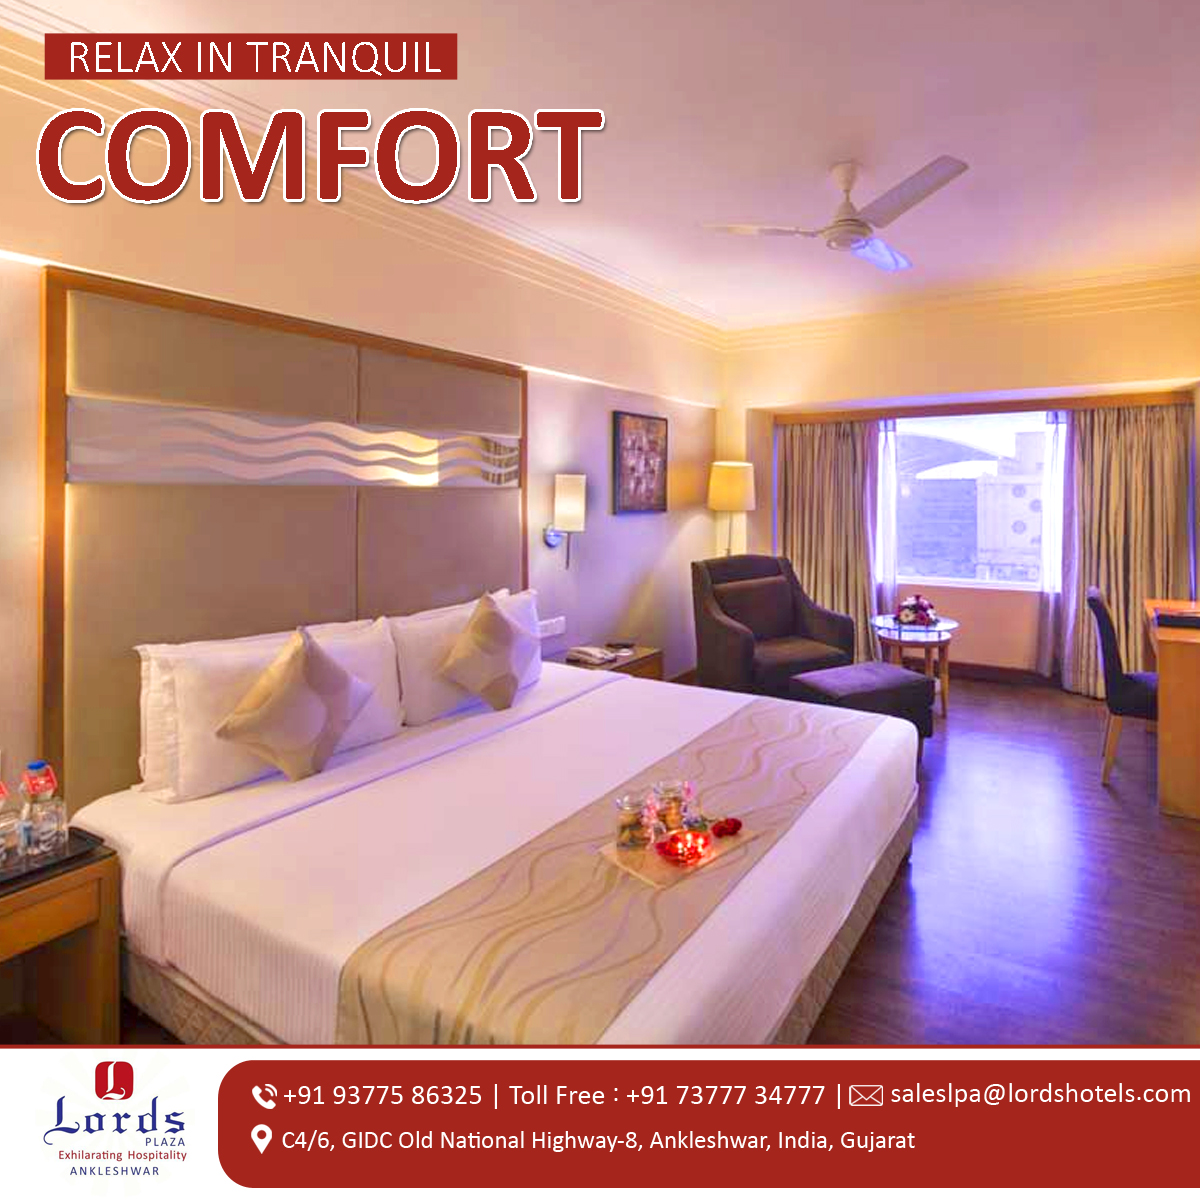 Find your perfect space at best price . Exclusively curated for you .

For Bookings/Enquiries Call: +91 93775 86325 | Toll Free : +91 73777 34777 |
𝐕𝐢𝐬𝐢𝐭 𝐎𝐮𝐫 𝐖𝐞𝐛𝐬𝐢𝐭𝐞: lordshotels.com/ankleshwarhote…
#summeroffer #promotion #roomoffer #lordshotelsandresorts #websiteoffer